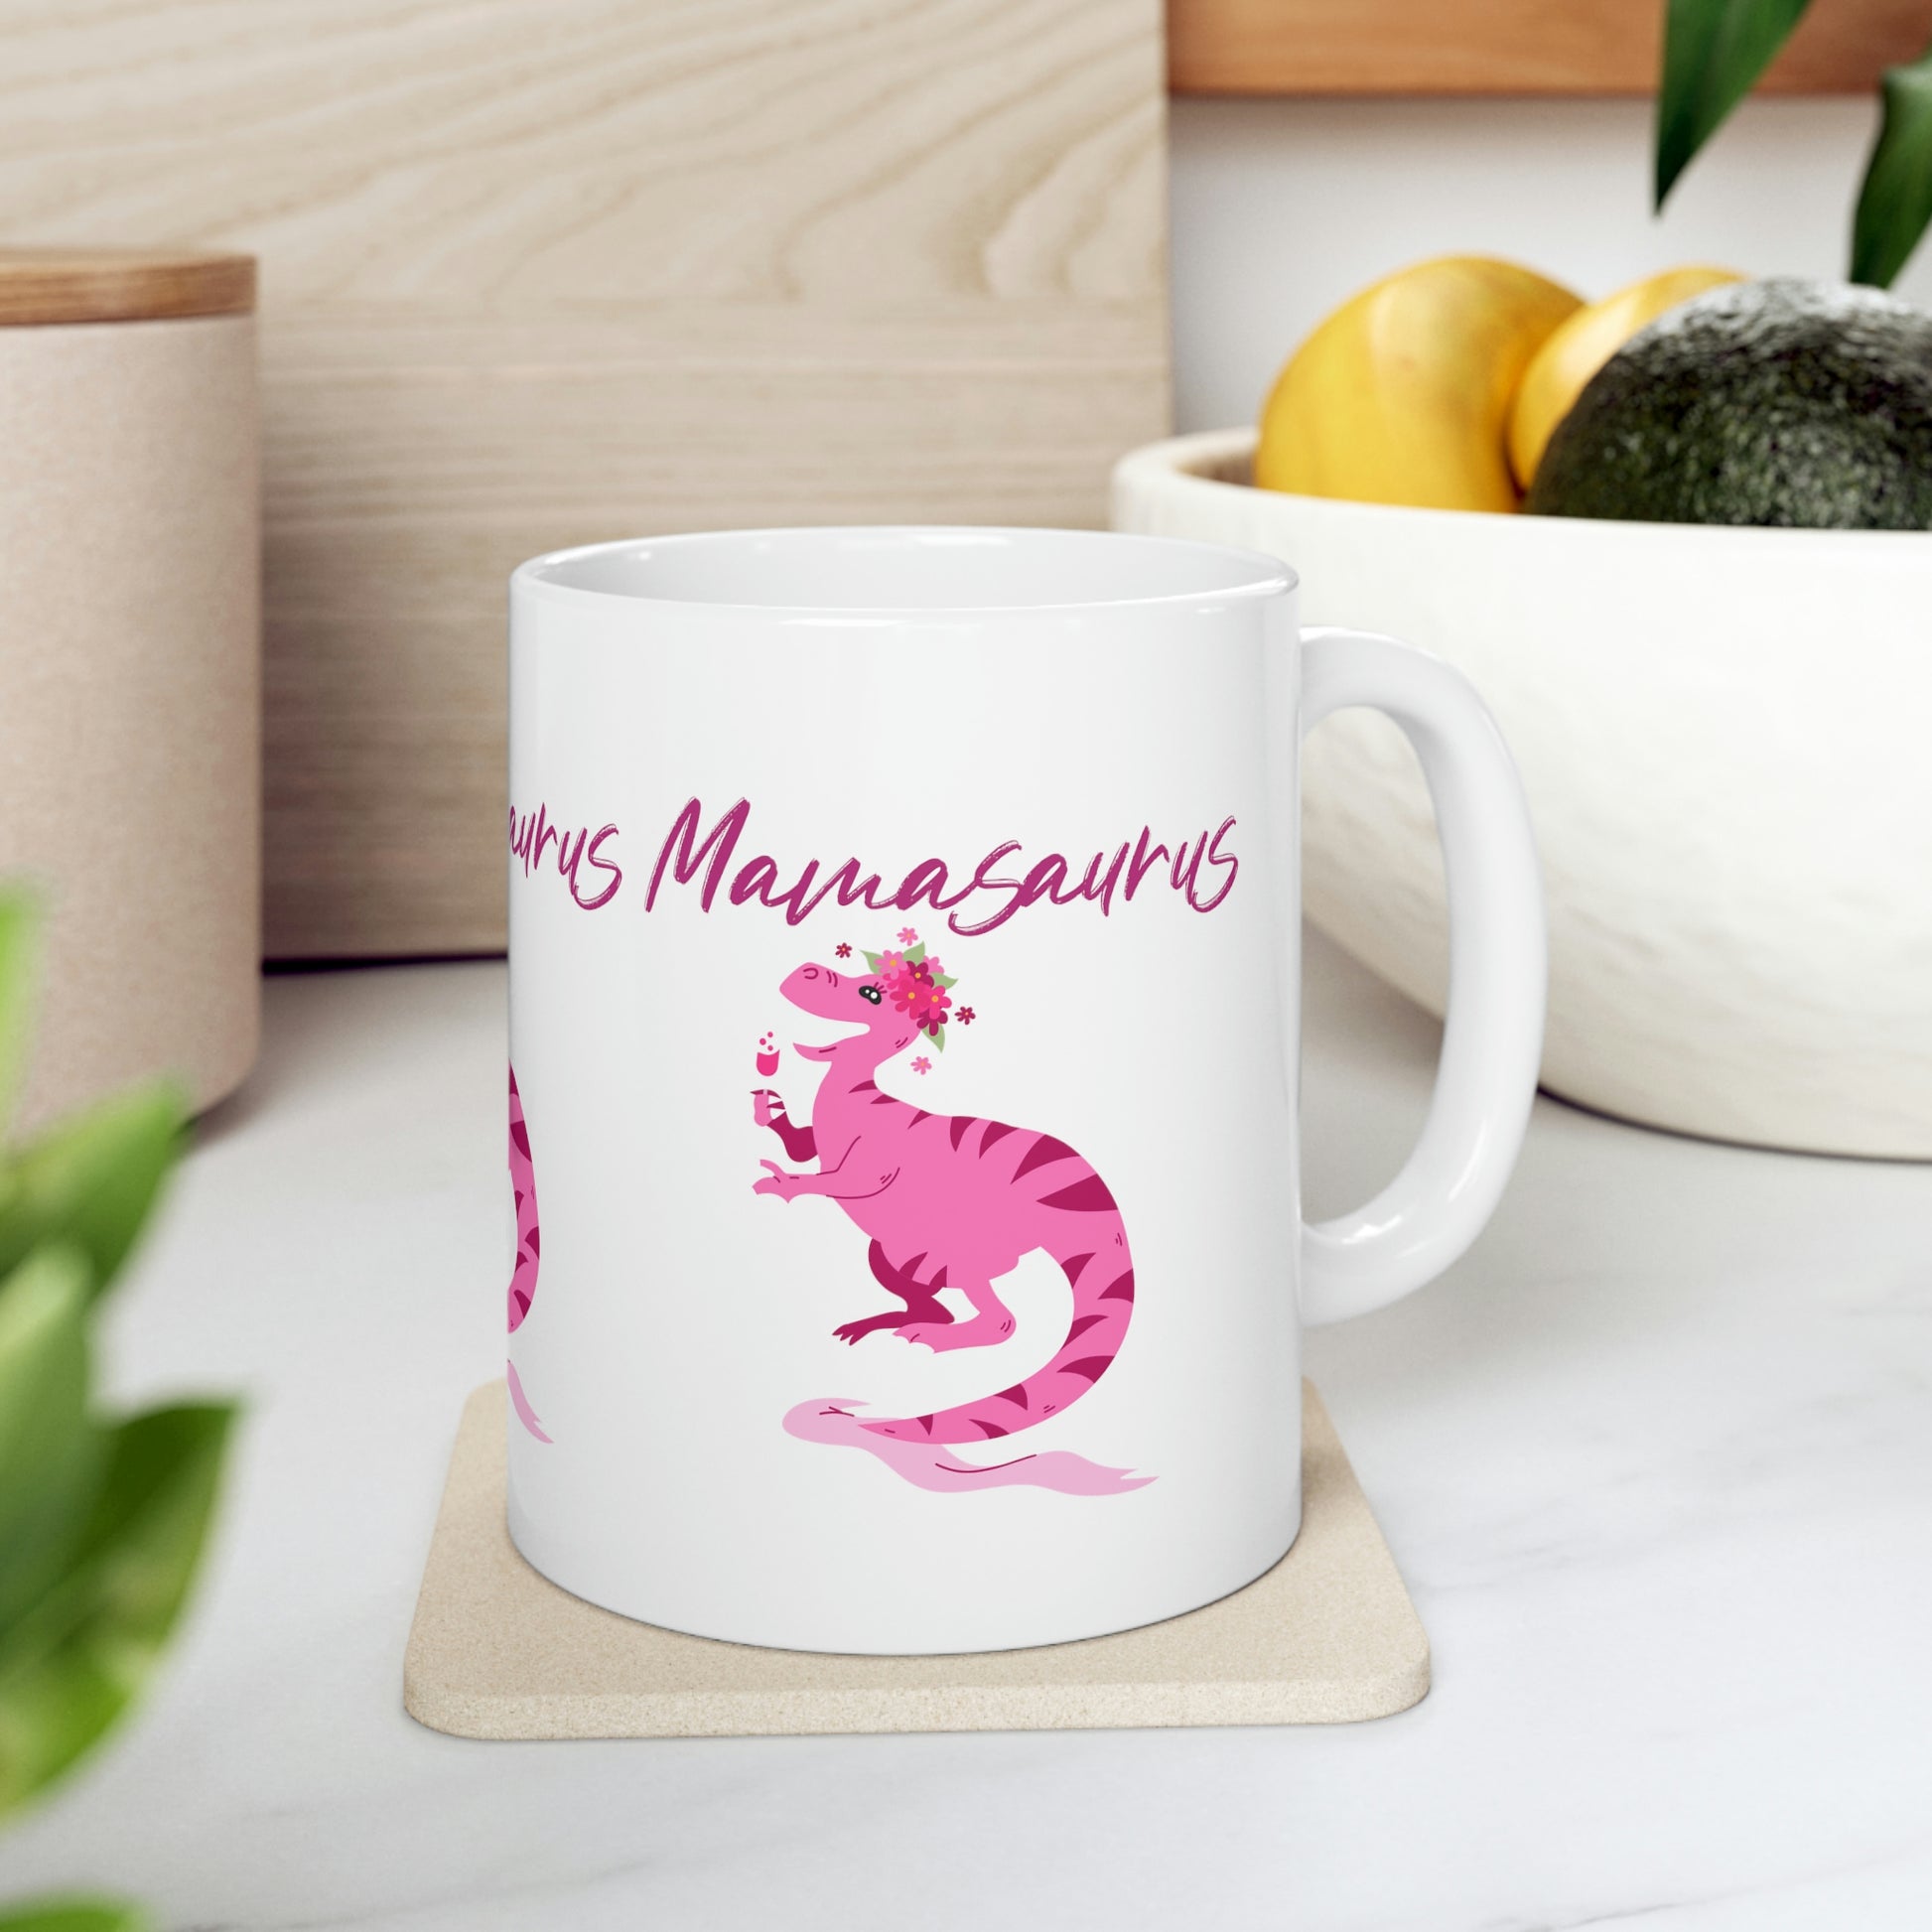 Mock up of the mug on a surface with a bowl of fruit in the background